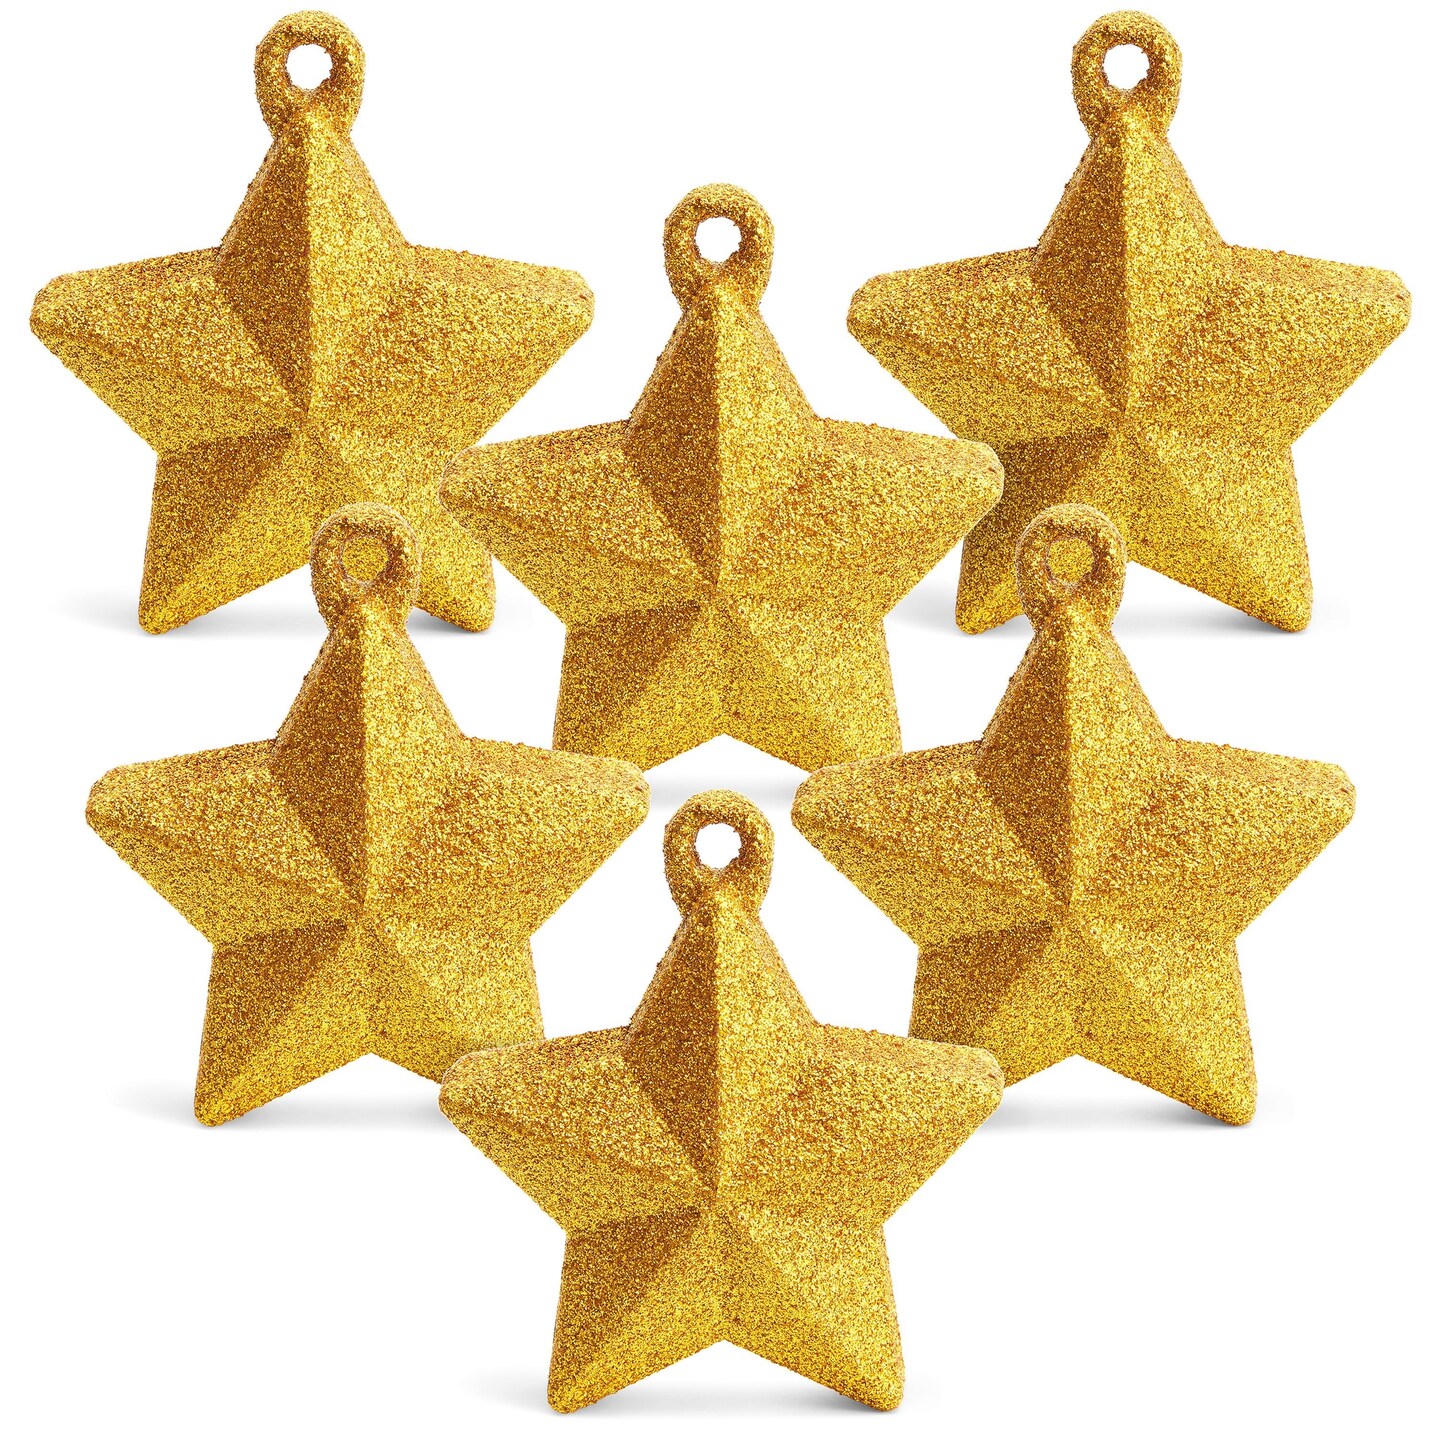 Pack of 6 Glitter Star Balloon Weights for Tables, Gold Party Decorations, (5.3 oz, 3.5x1.75x4 inch)